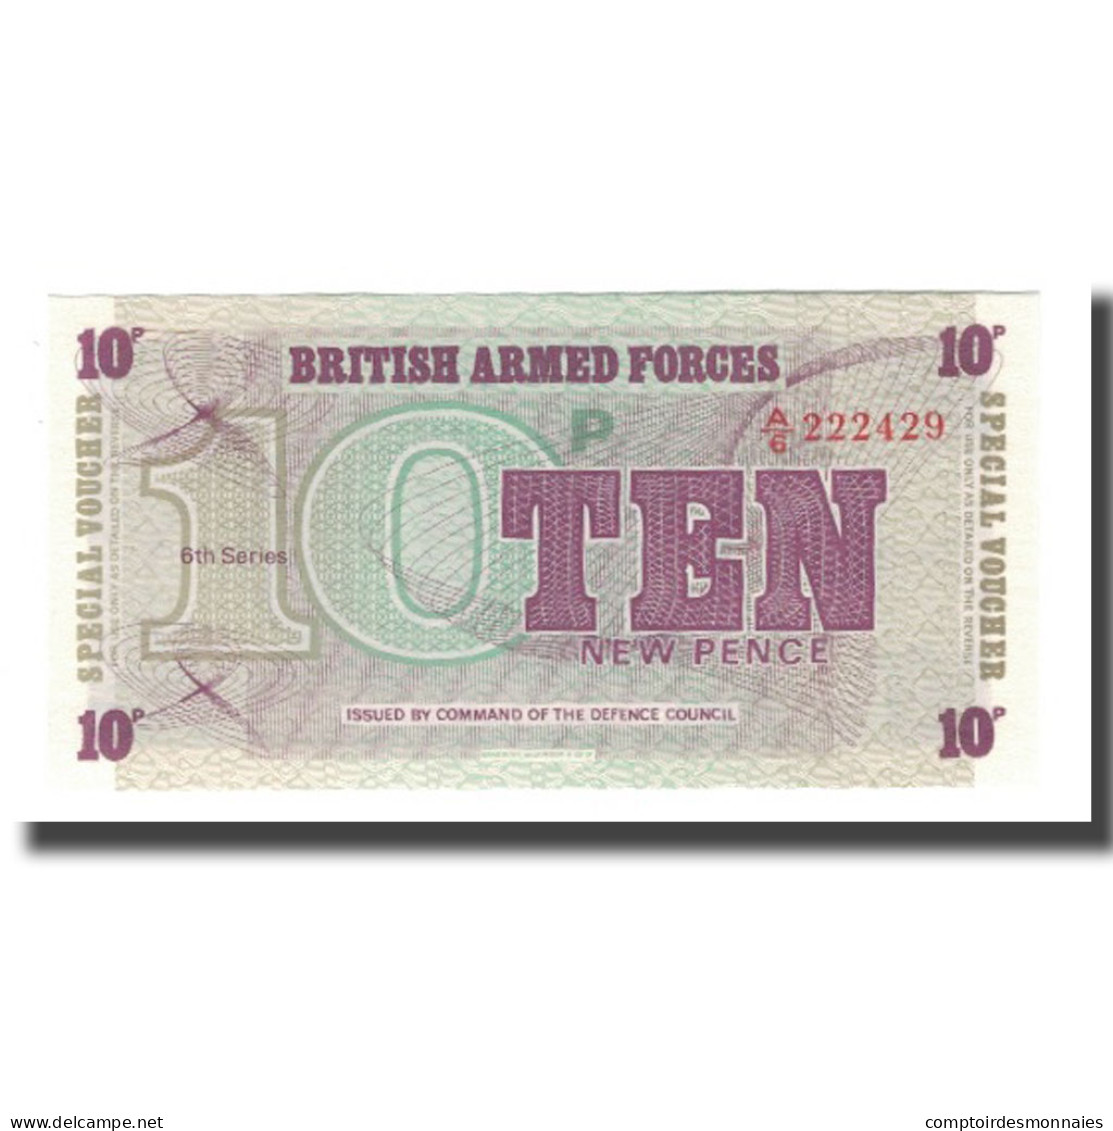 Billet, Grande-Bretagne, 10 New Pence, Undated (1972), KM:M48, NEUF - British Armed Forces & Special Vouchers